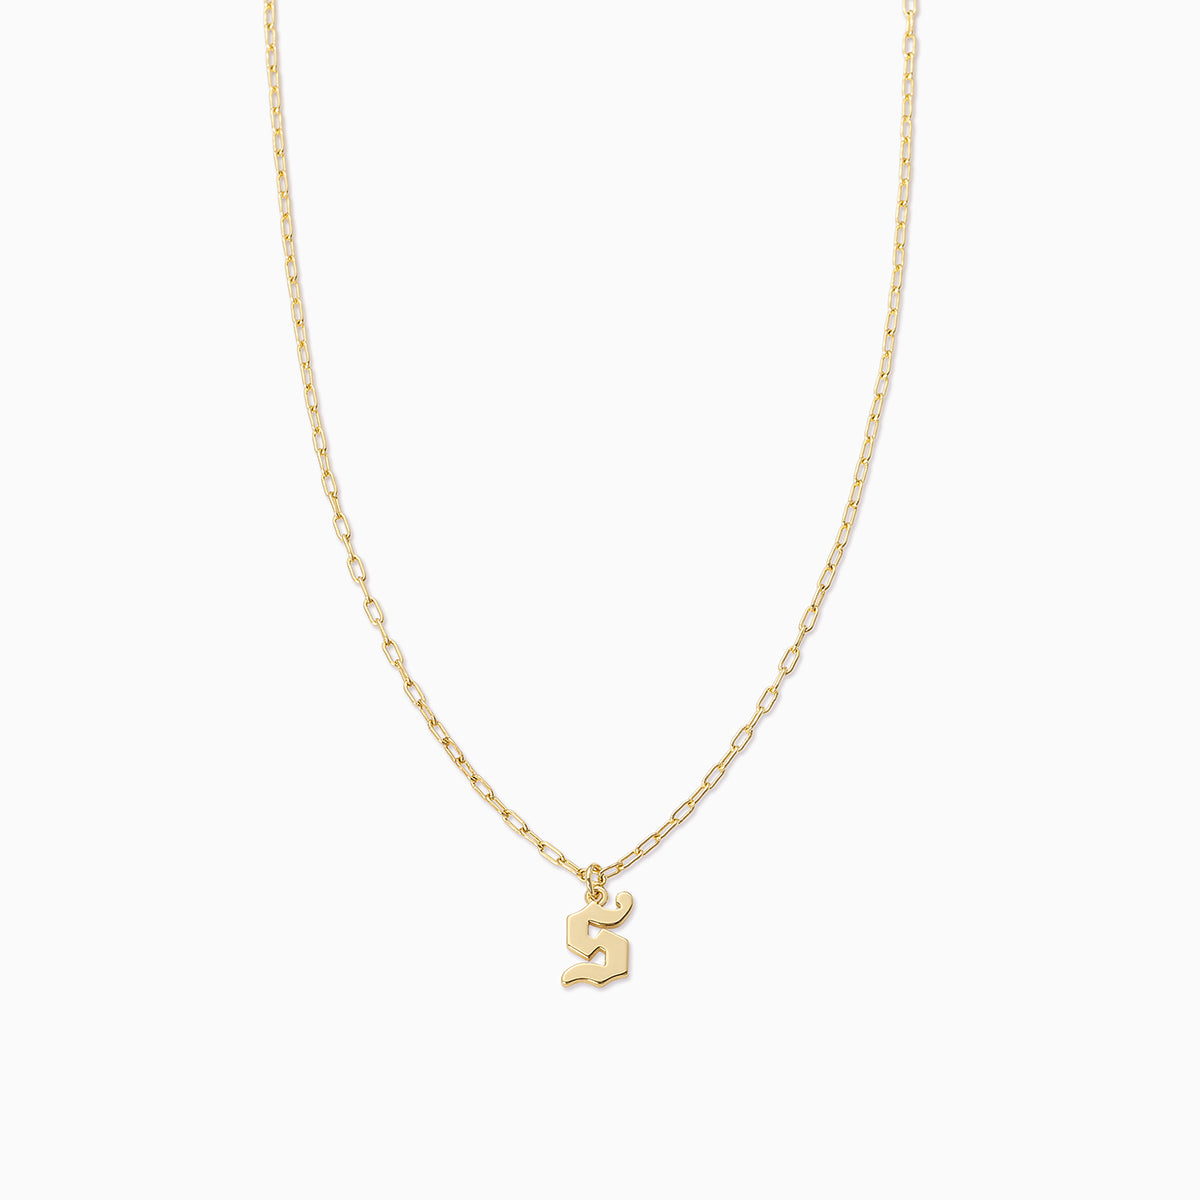 Gothic Initial Pendant Necklace | Gold S | Product Image | Uncommon James